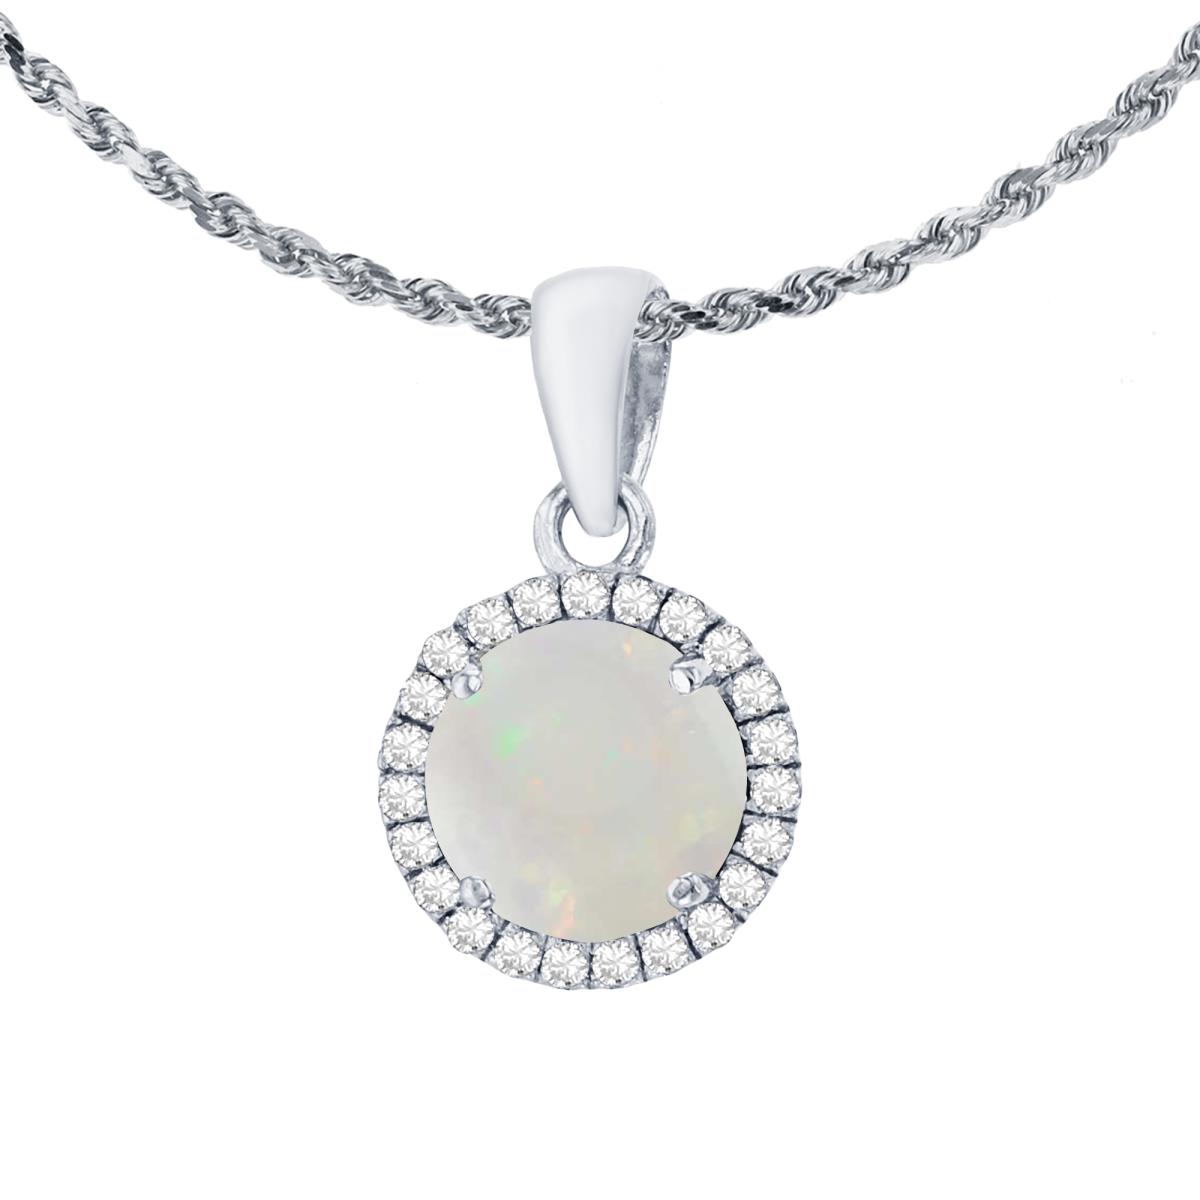 14K White Gold 7mm Round Opal & 0.12 CTTW Diamond Halo 18" Rope Chain Necklace